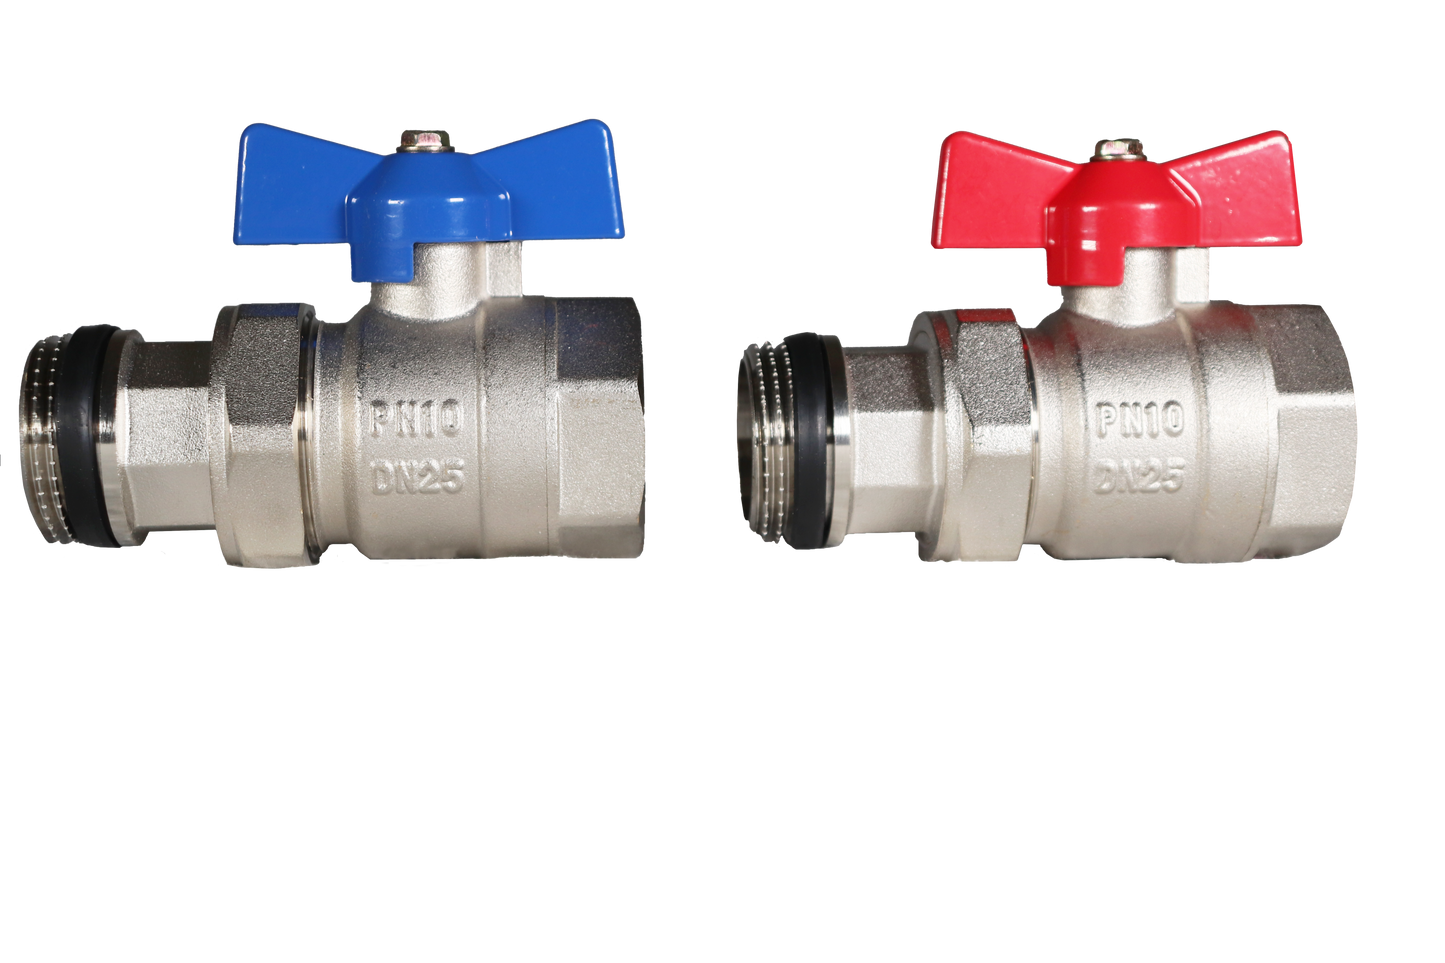 Pair of 1" Isolation Valves No Gauges